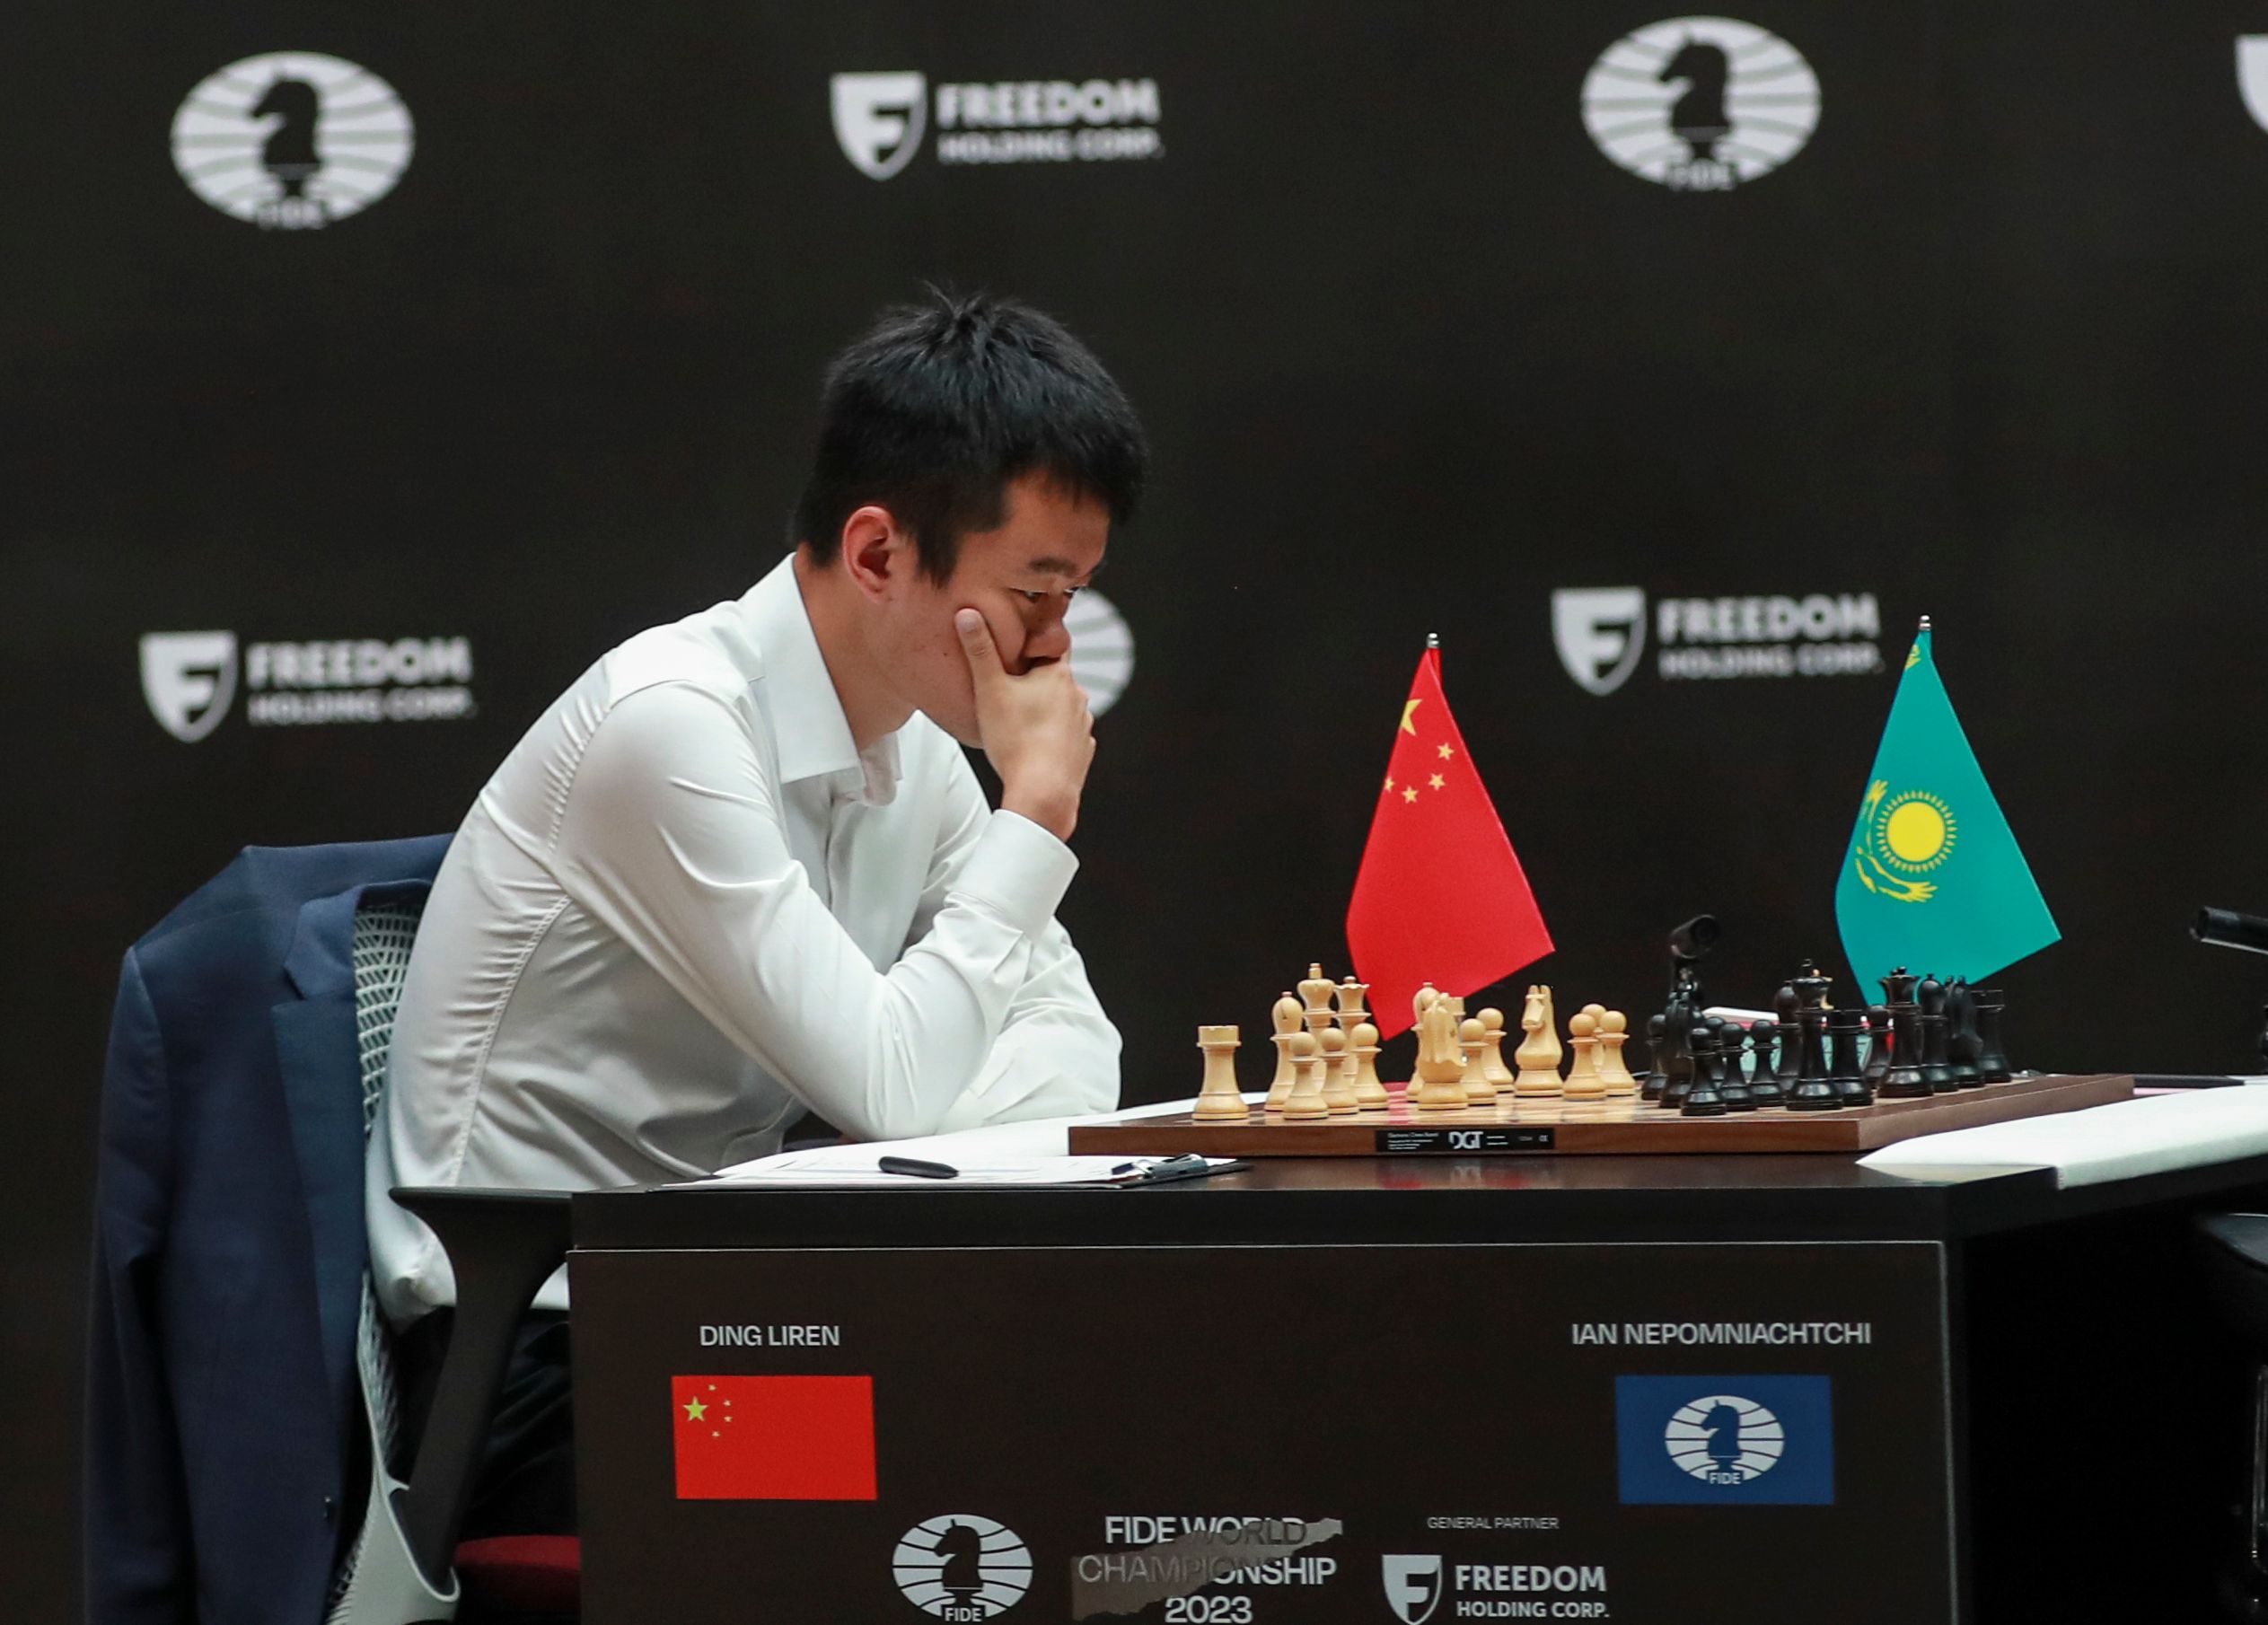 FIDE World Championship  Ding vs. Nepomniachtchi: Will Ding Fight